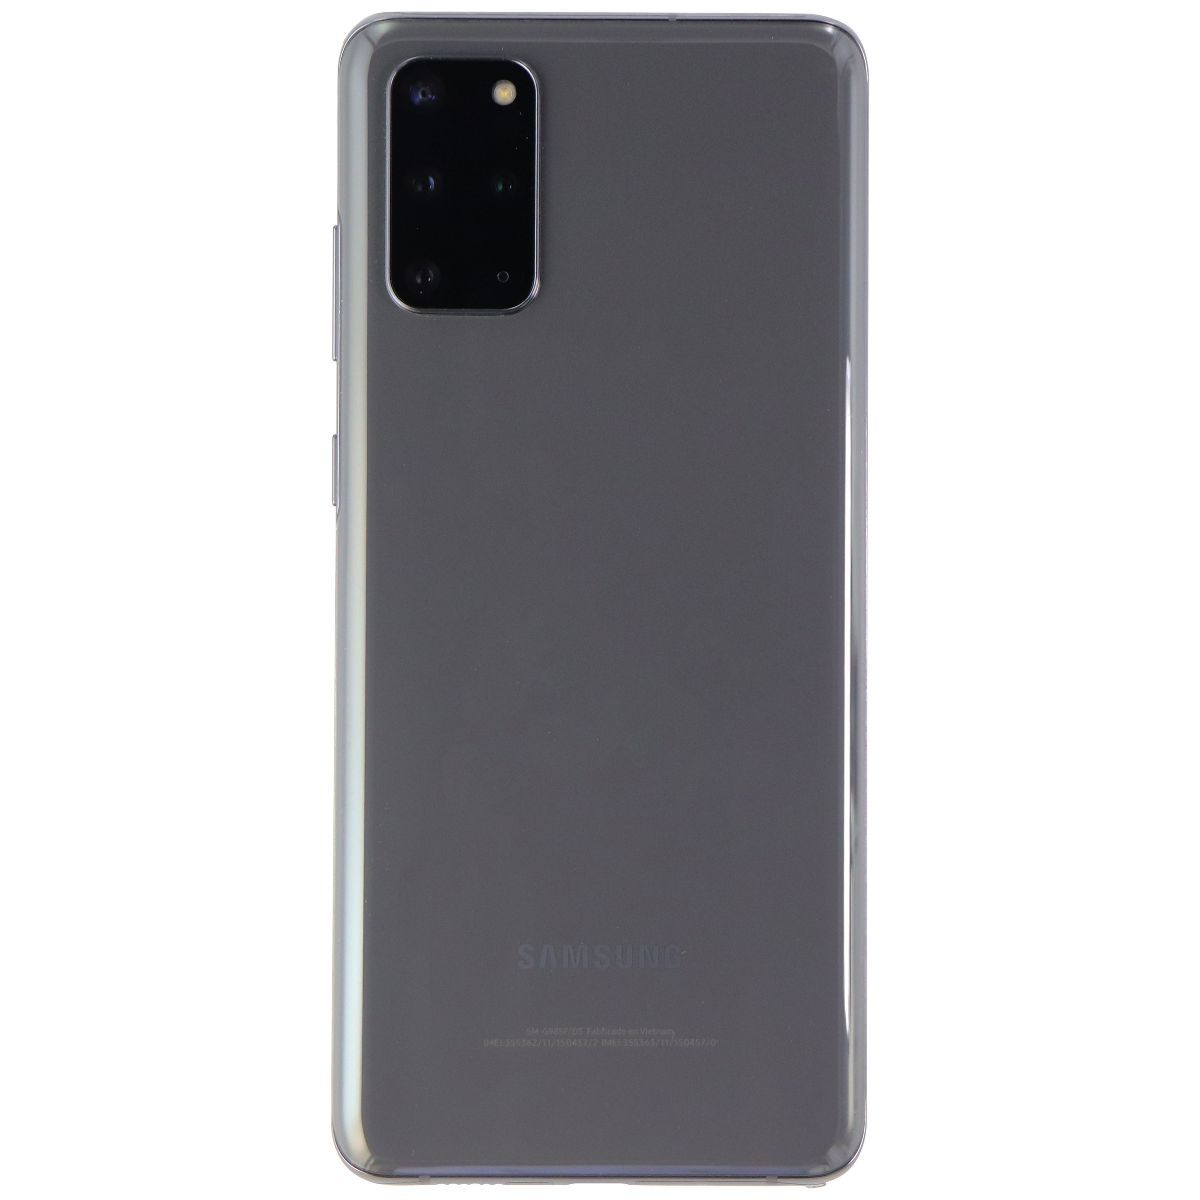 Samsung Galaxy S20+ (6.7-in) Non-5G (SM-G985F/DS) UNLOCKED - 128GB/Cosmic Gray Cell Phones & Smartphones Samsung    - Simple Cell Bulk Wholesale Pricing - USA Seller